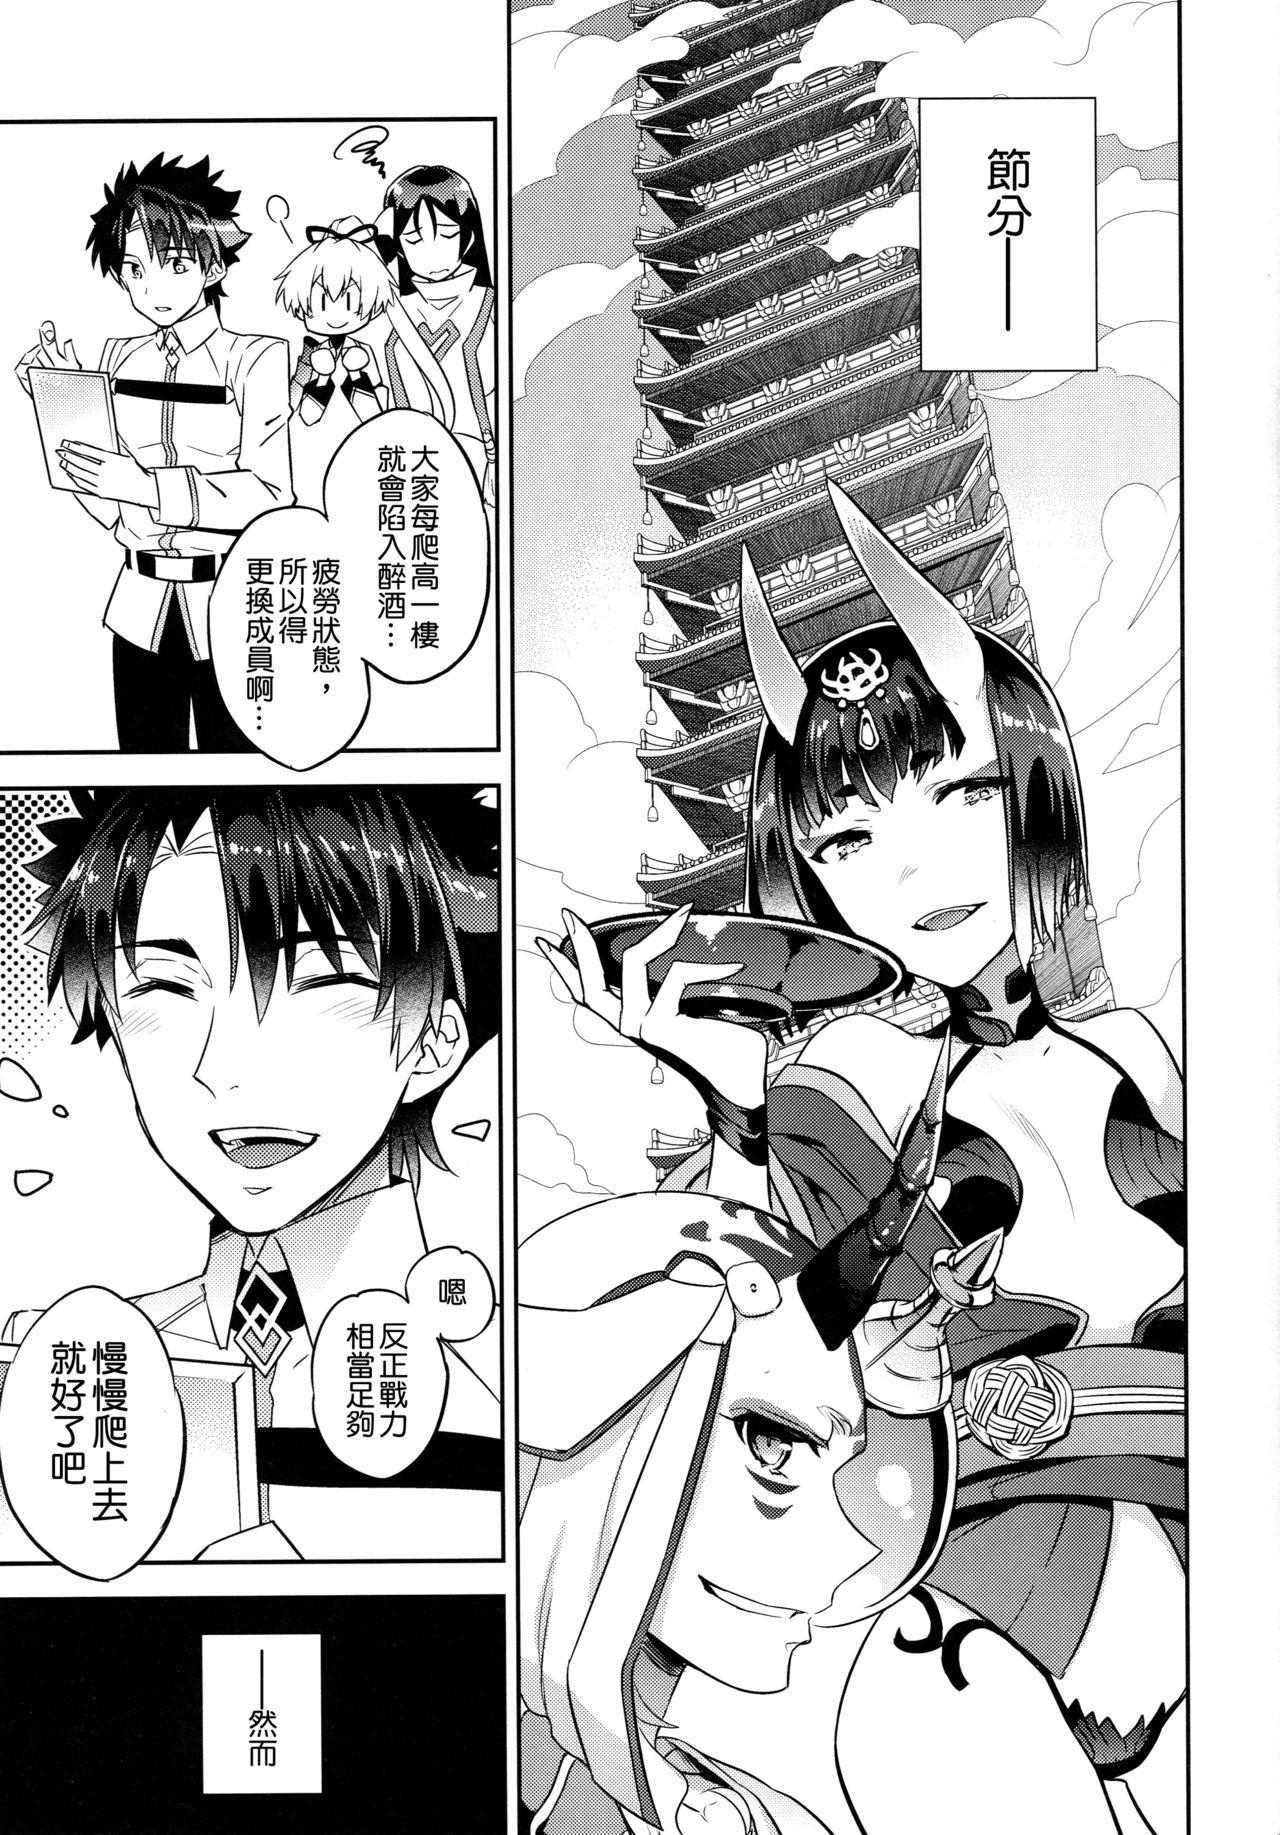 Rough Fuck (C94) [Crazy9 (Ichitaka)] C9-36 Jeanne Alter-chan to Yopparai Onsen (Fate/Grand Order) [Chinese] [空気系☆漢化] - Fate grand order Amateurs - Page 4